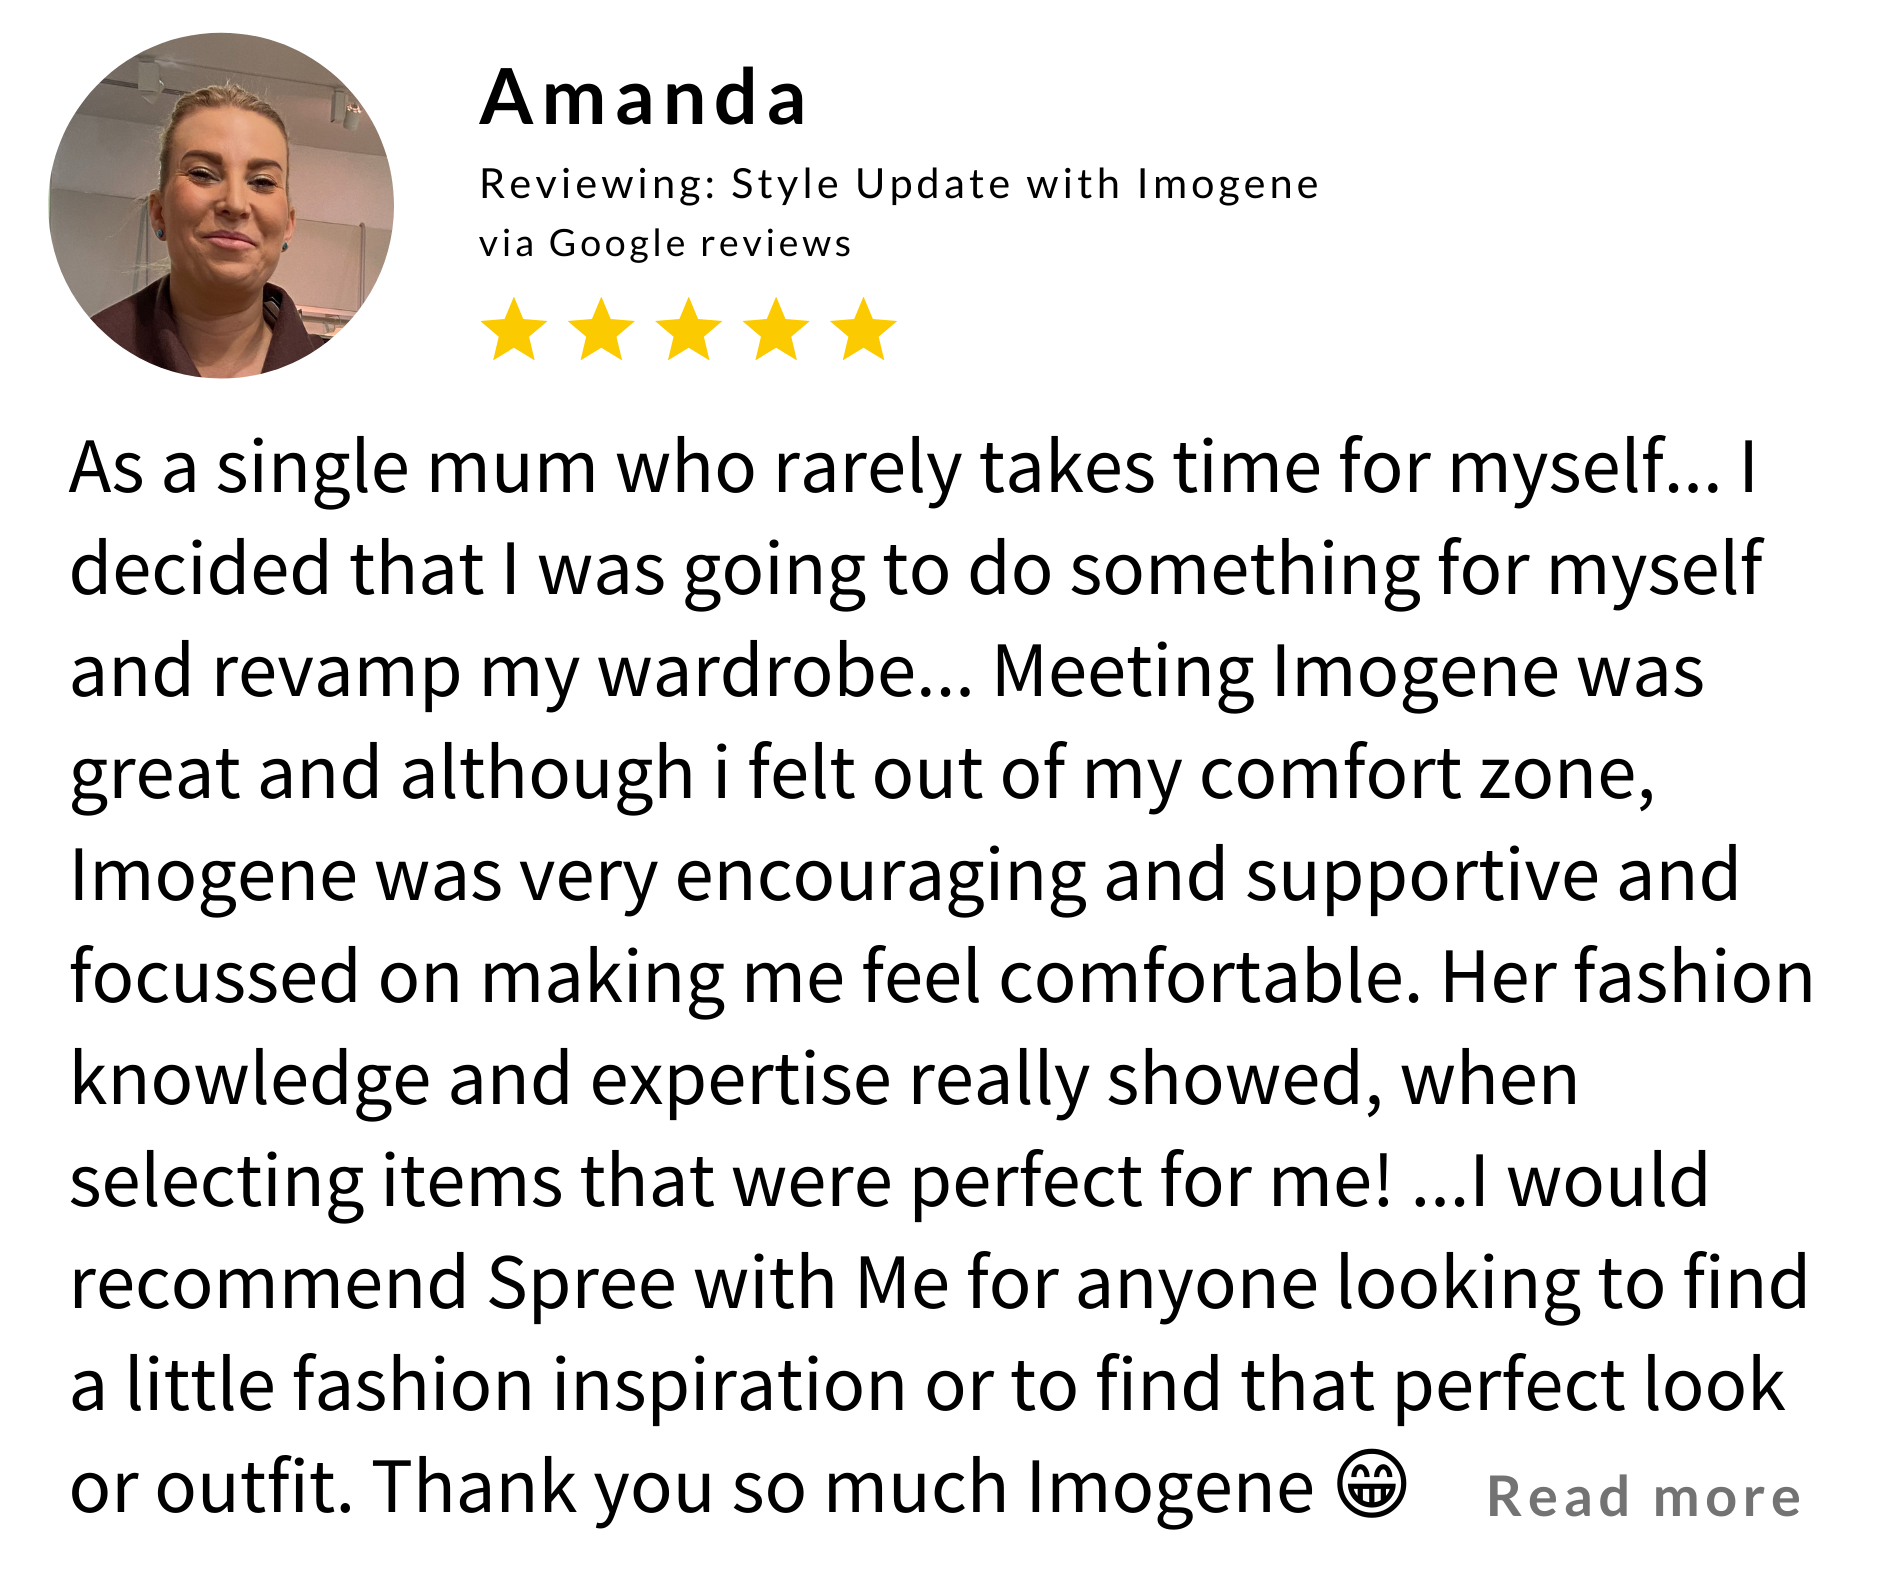 Amanda_Brisbane Spree with Me Personal Stylist Review.png